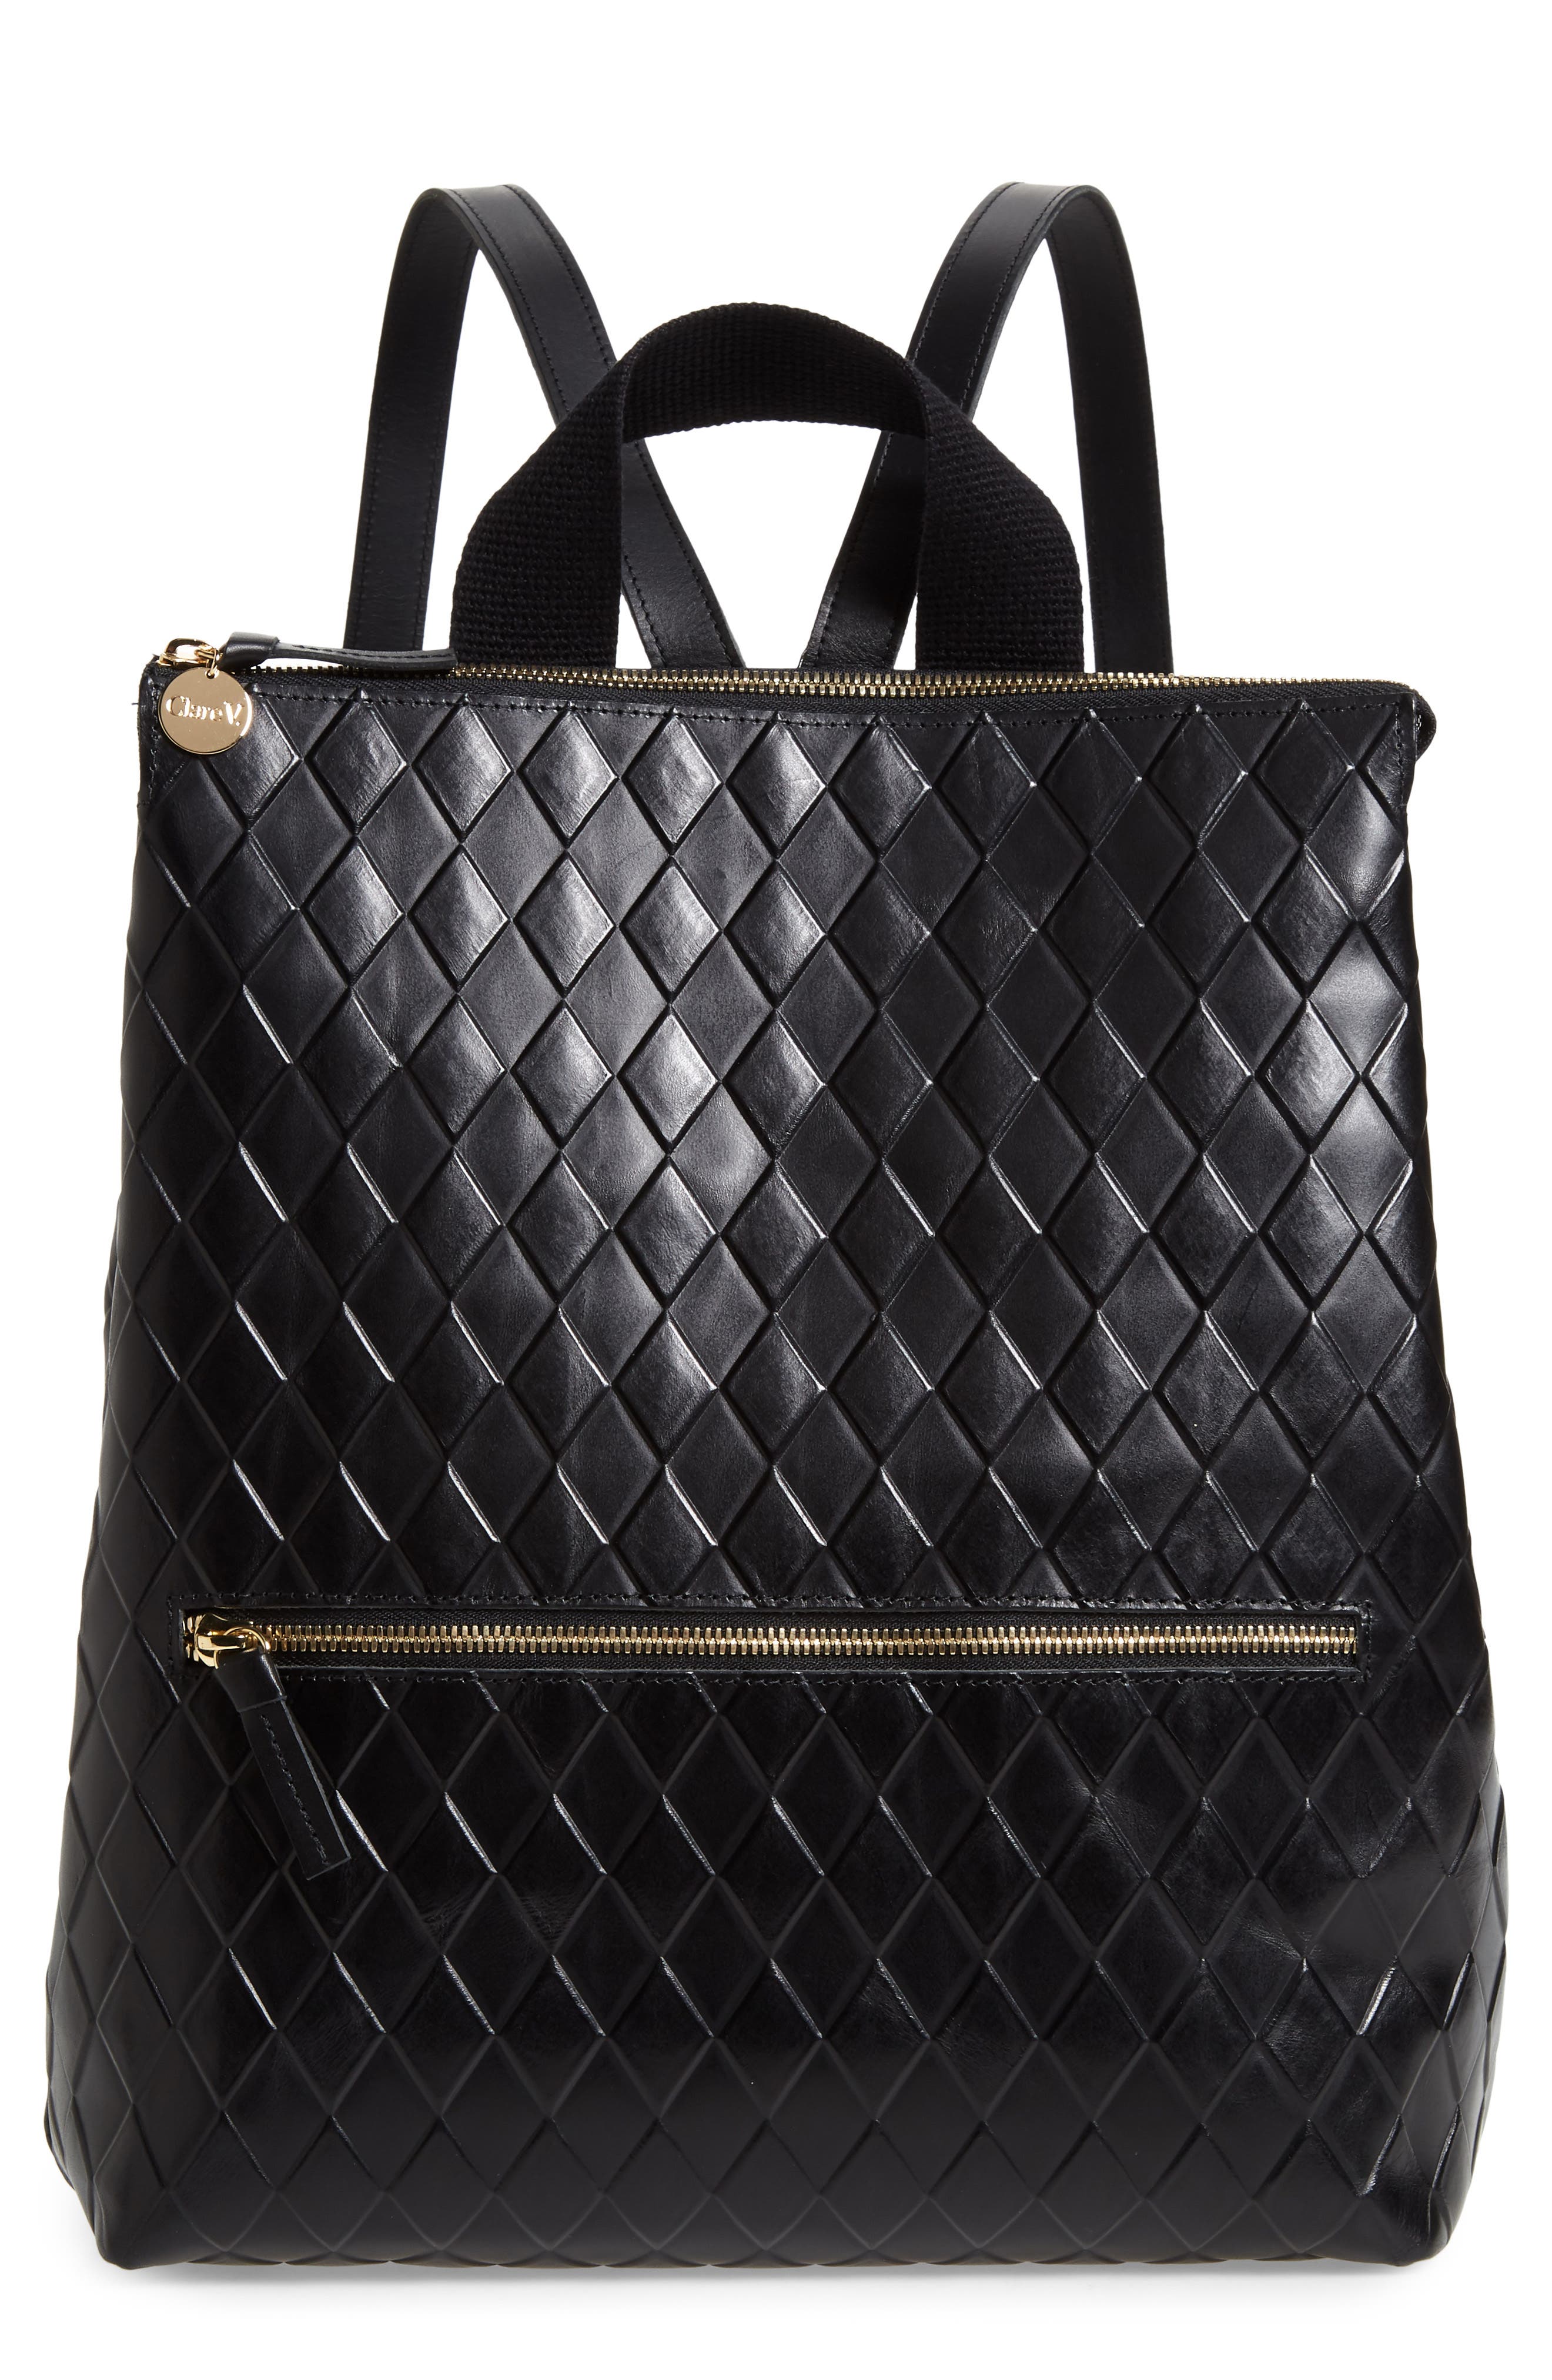 CLARE V REMI WOVEN LEATHER BACKPACK,810040411151